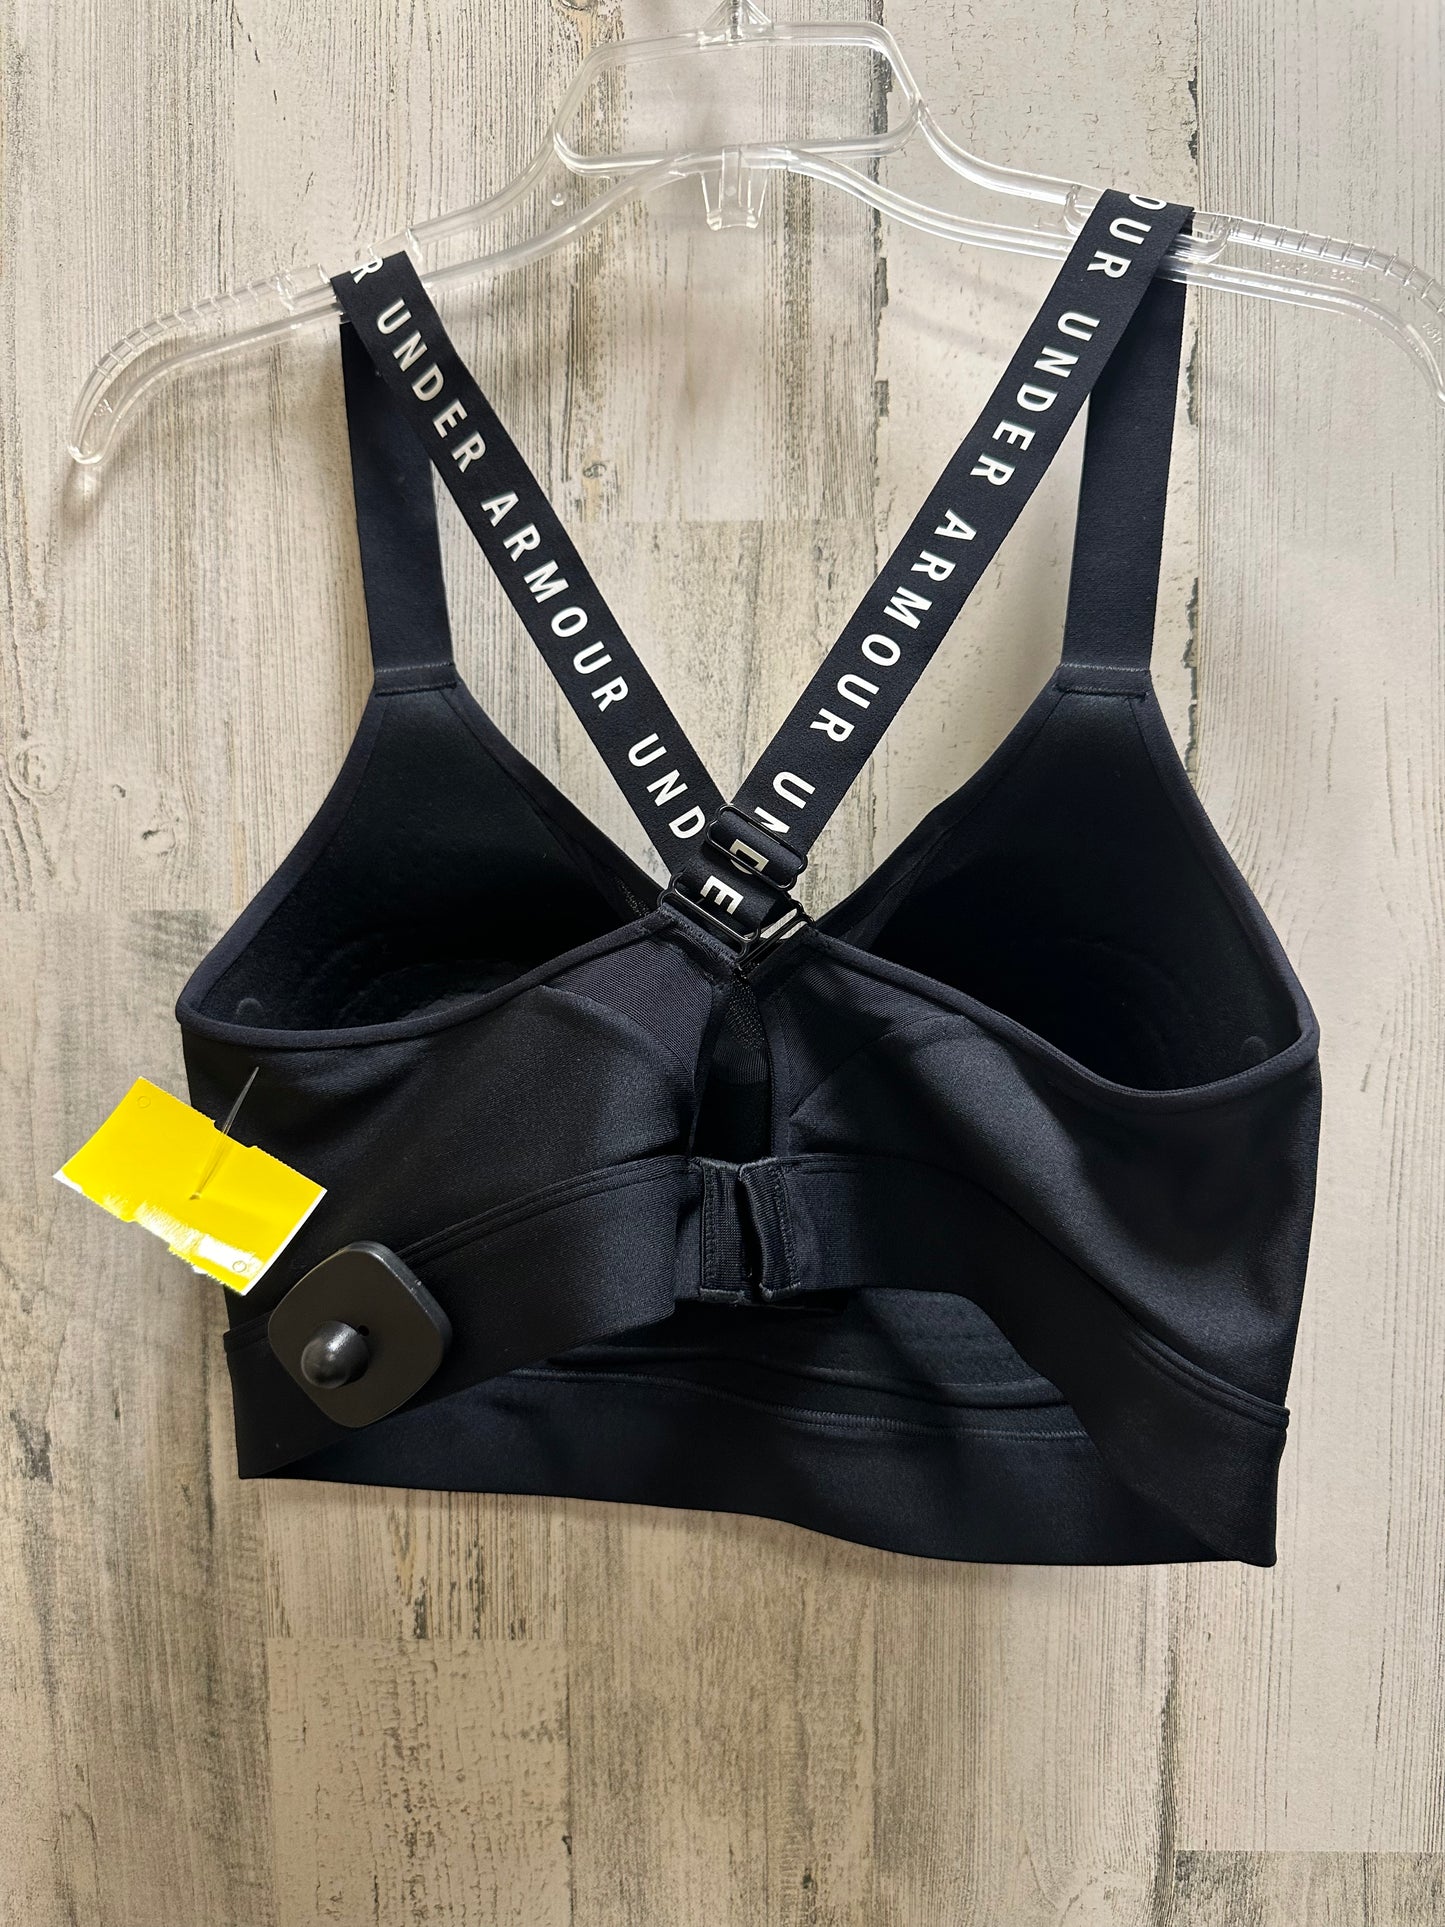 Athletic Bra By Under Armour  Size: Xl